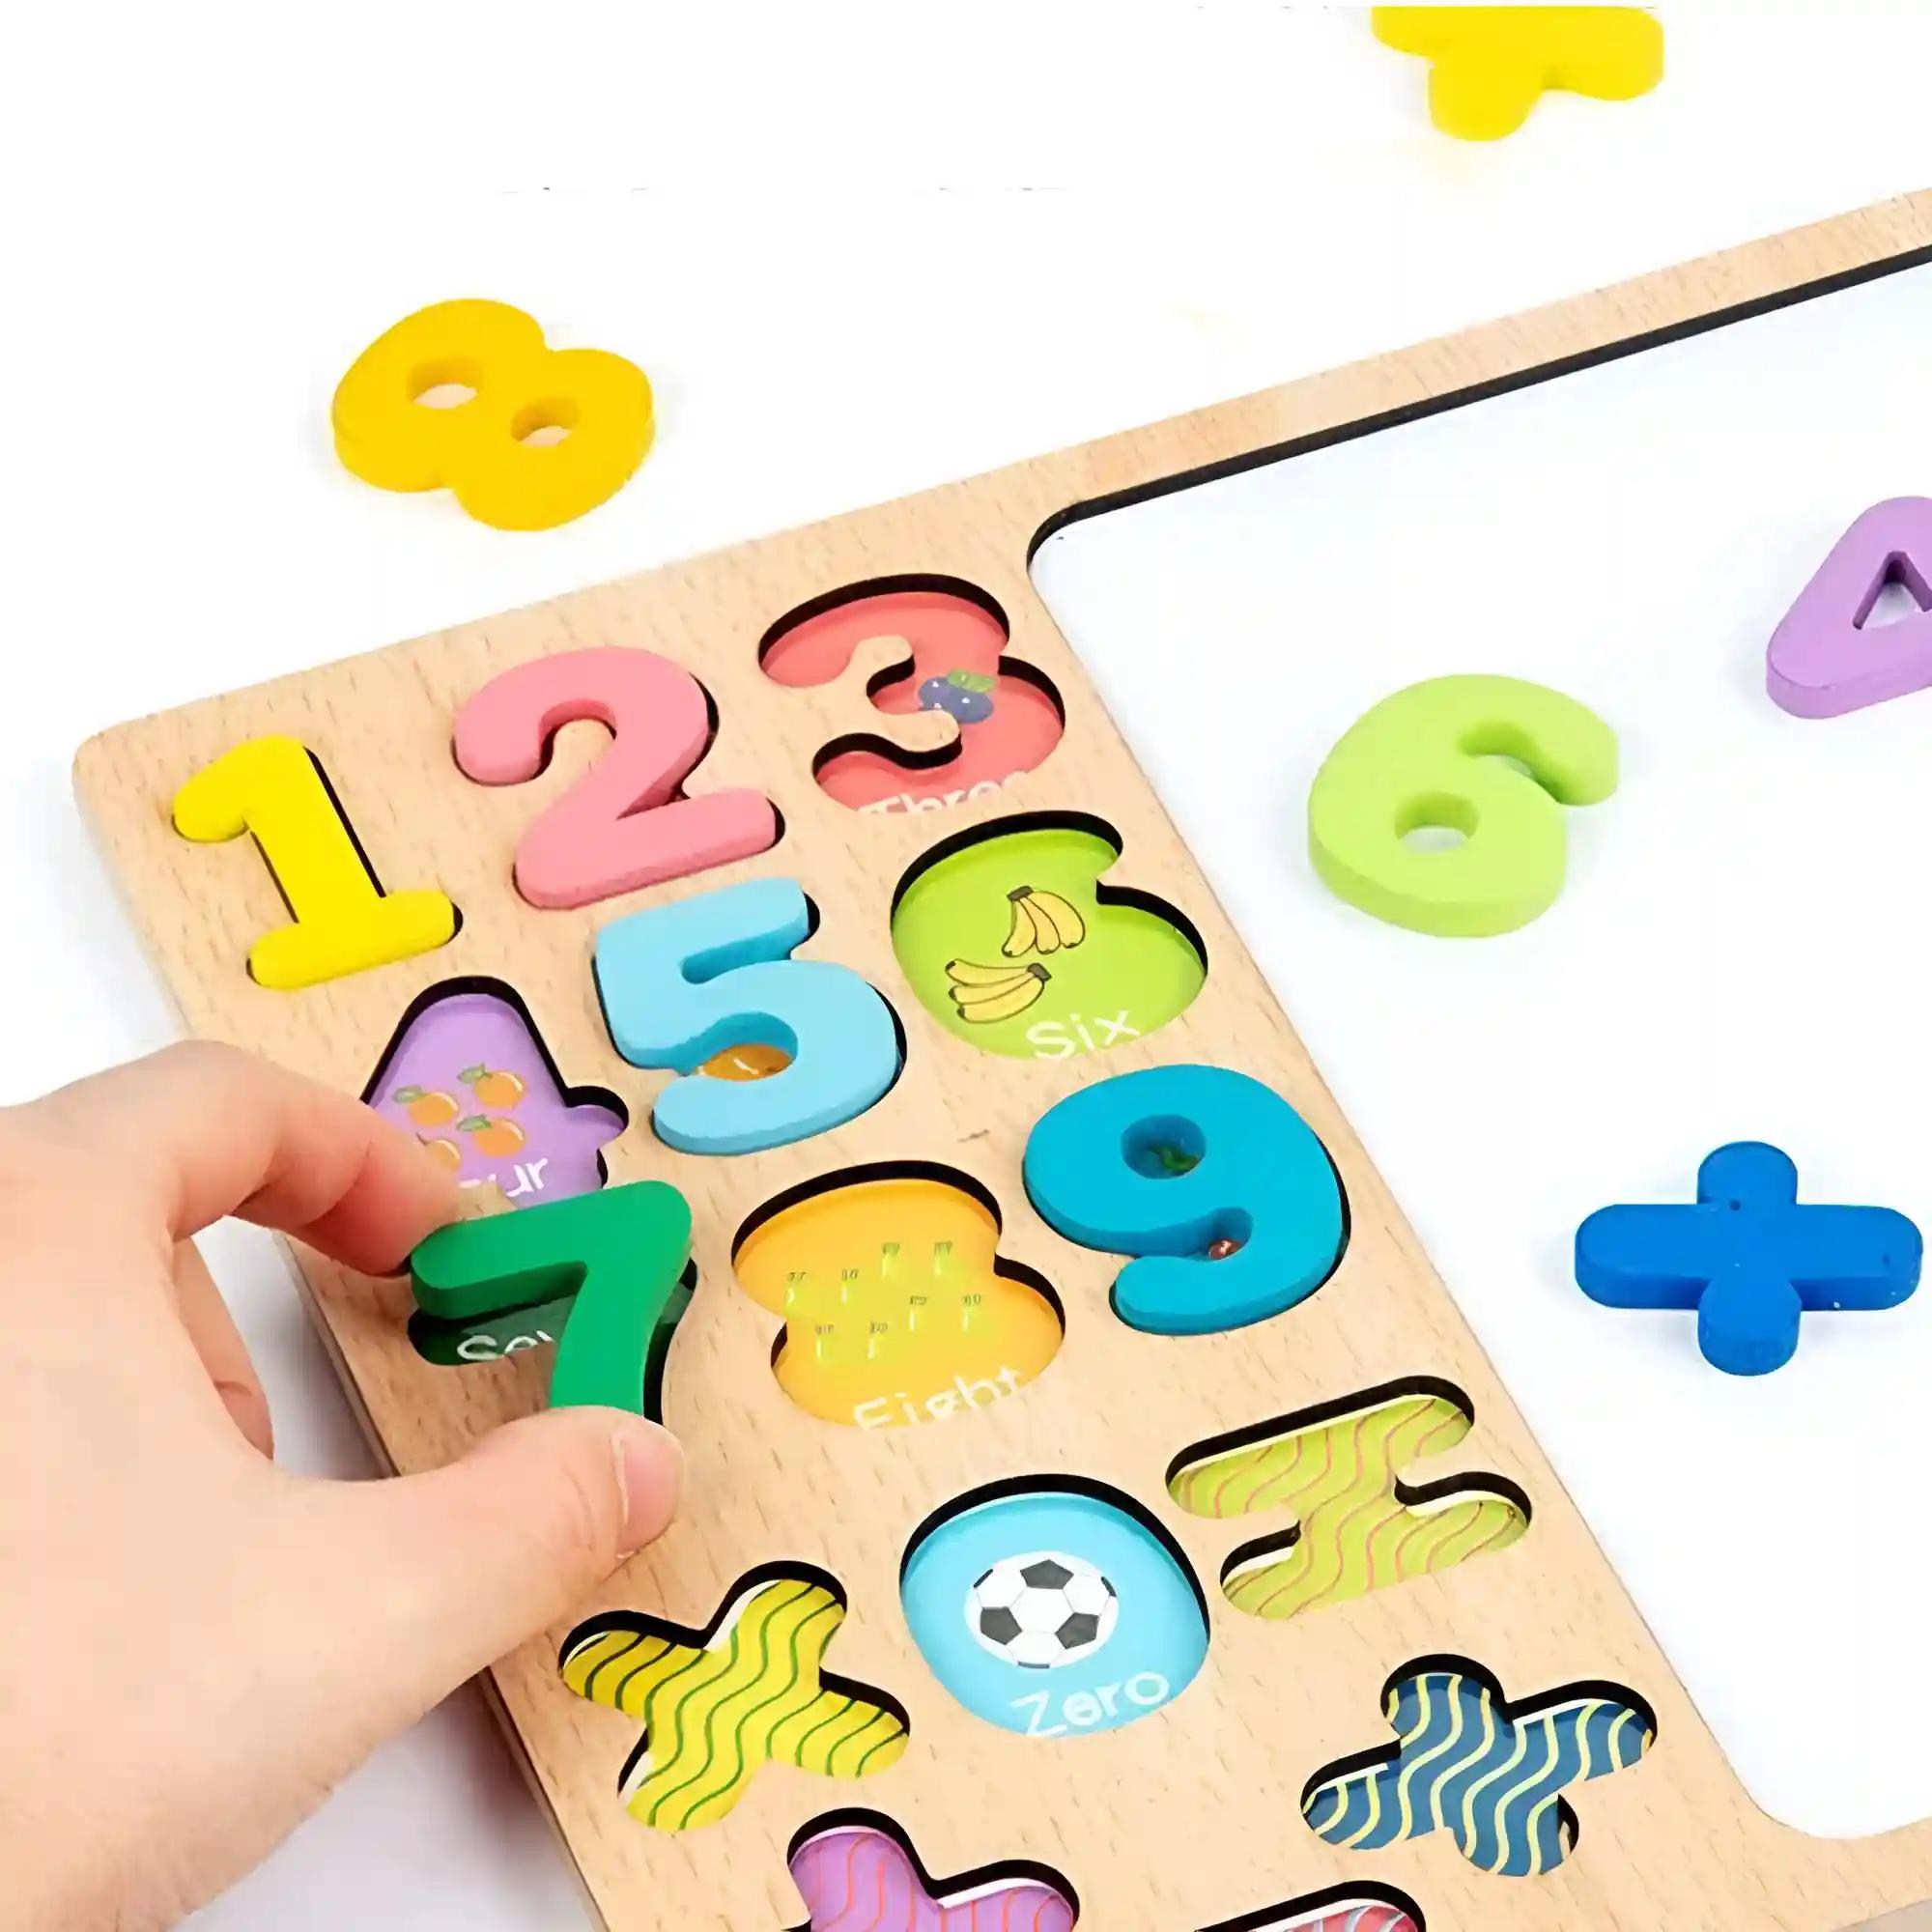 Numeric 1234 3D Puzzles Toys For Kids & Toddlers Educational & Mathematical Equations Tool Developing Mind Gaming Skill Abilities Wooden 1 To 9 & 0 White Surface Drawing Board (Pack Of 1)